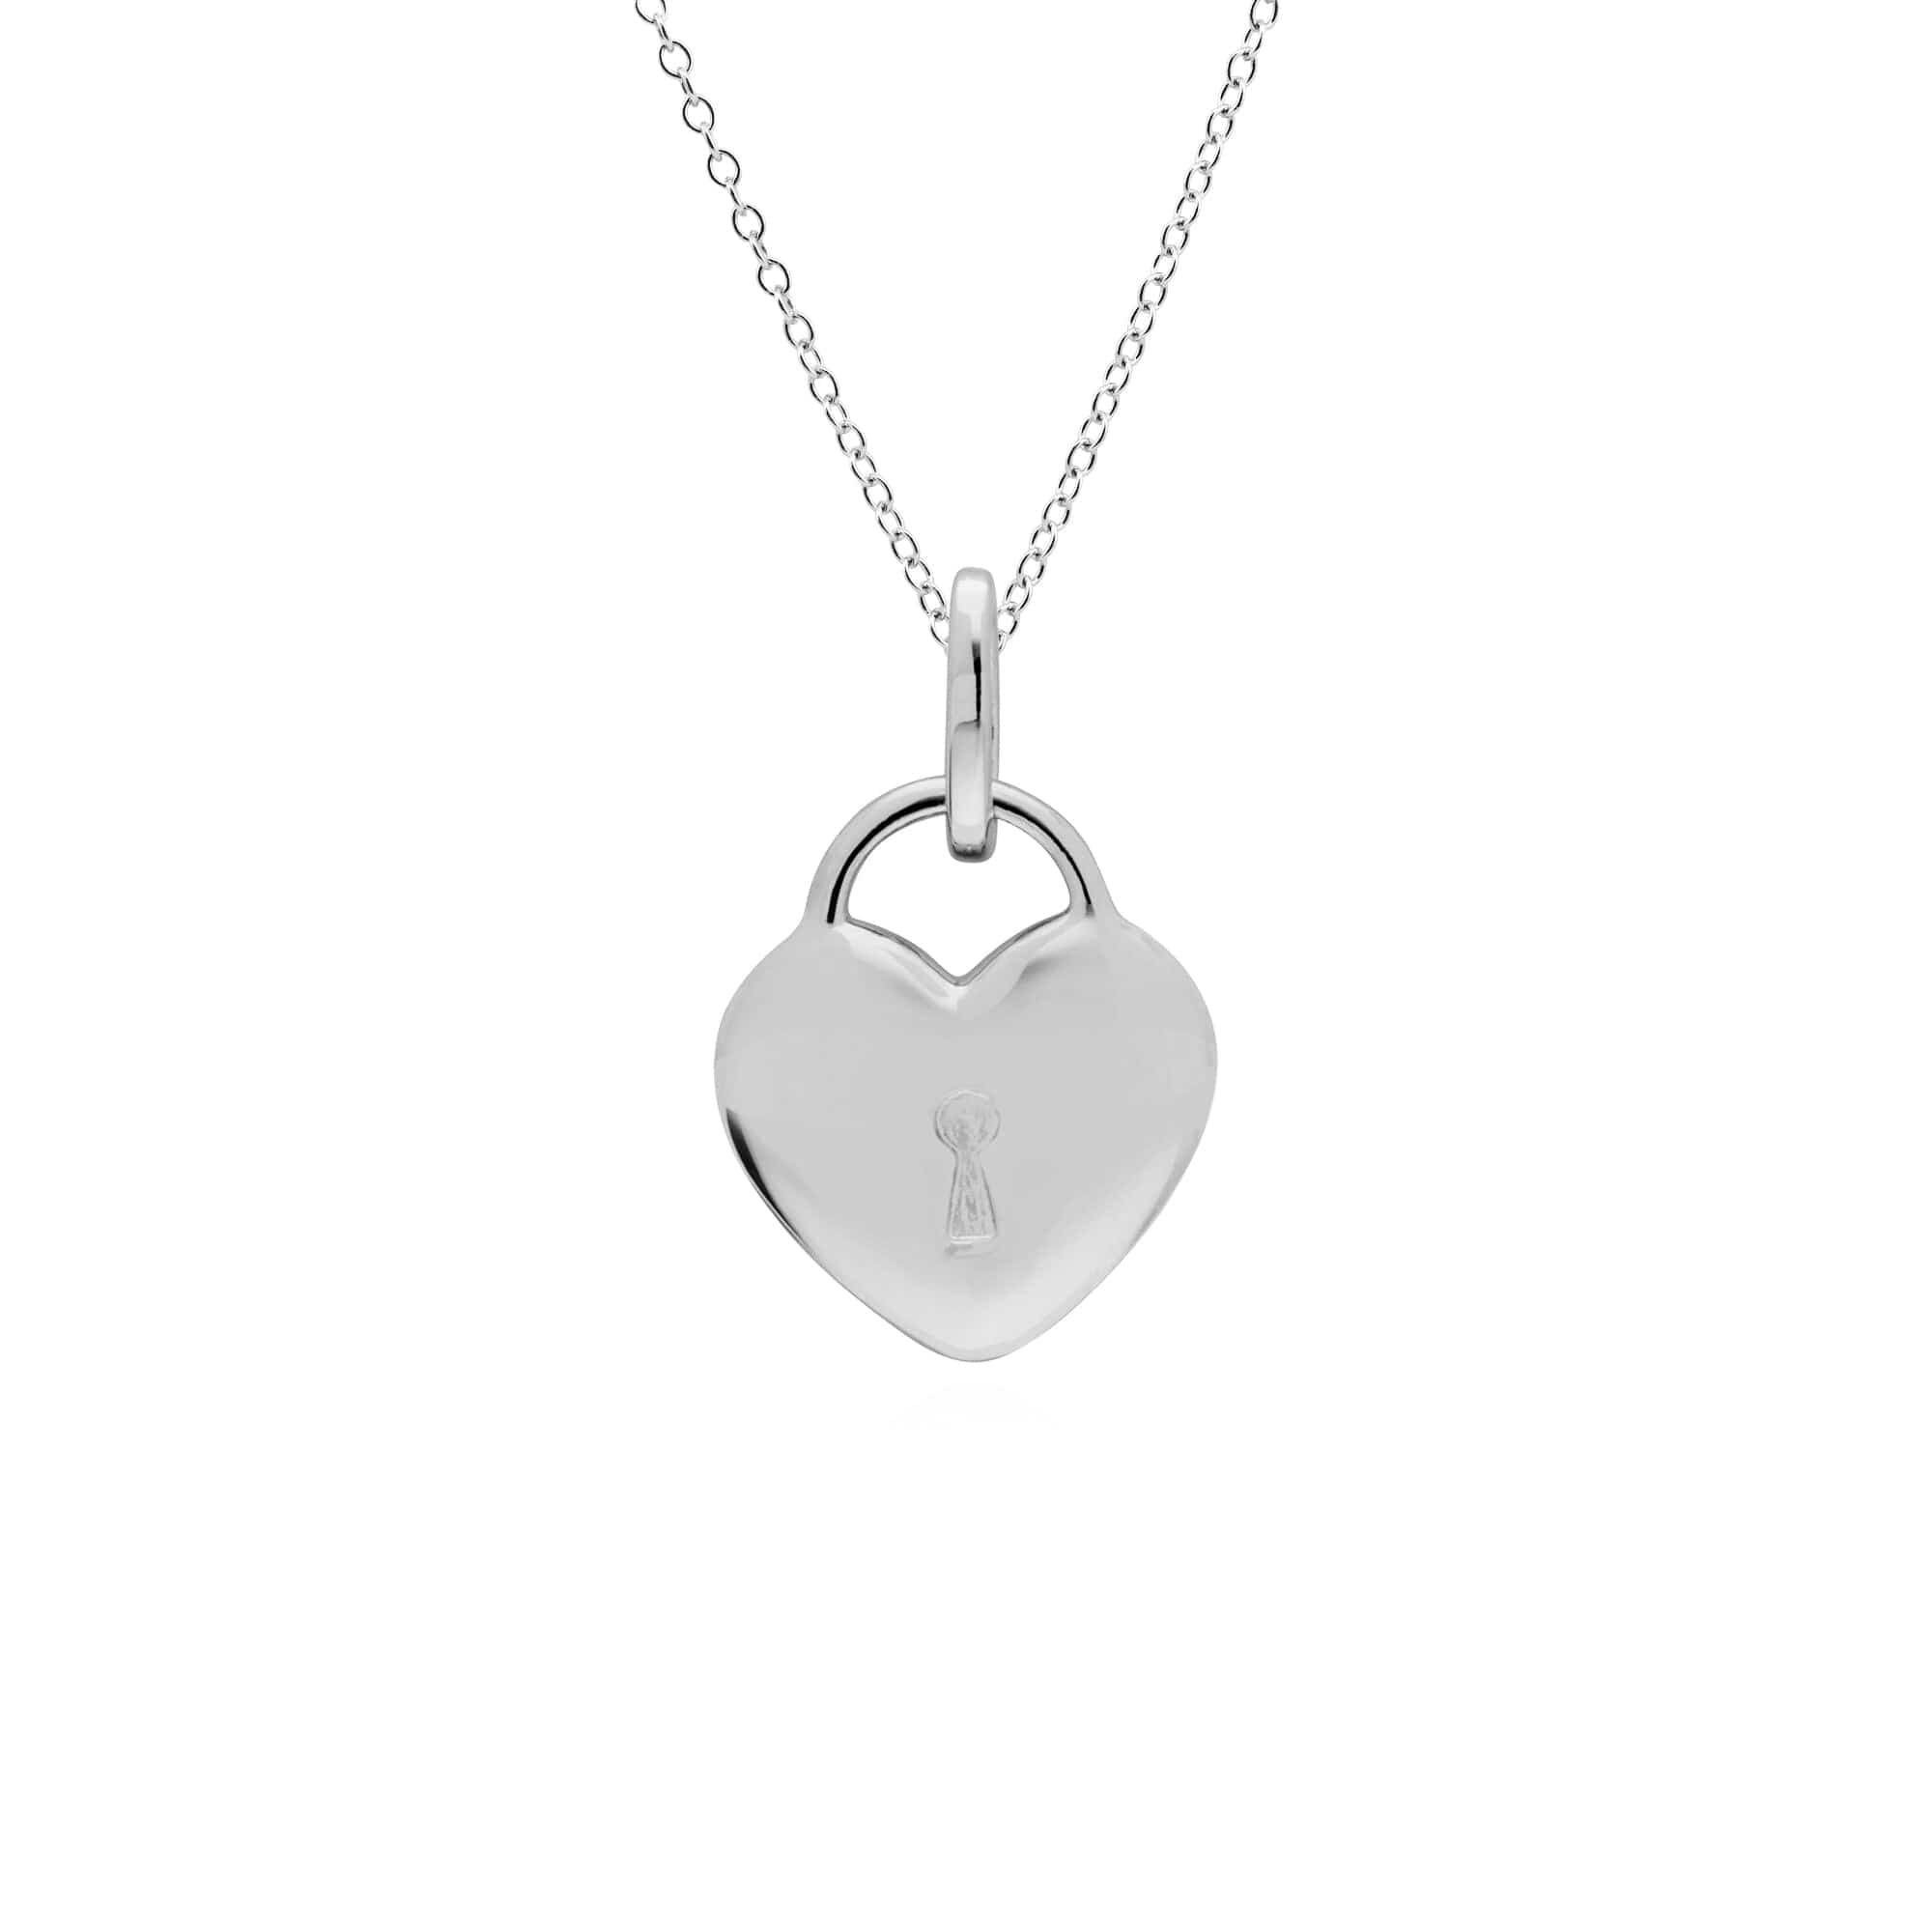 270P025801925-270P027001925 Classic Heart Lock Pendant & Pearl Charm in 925 Sterling Silver 3